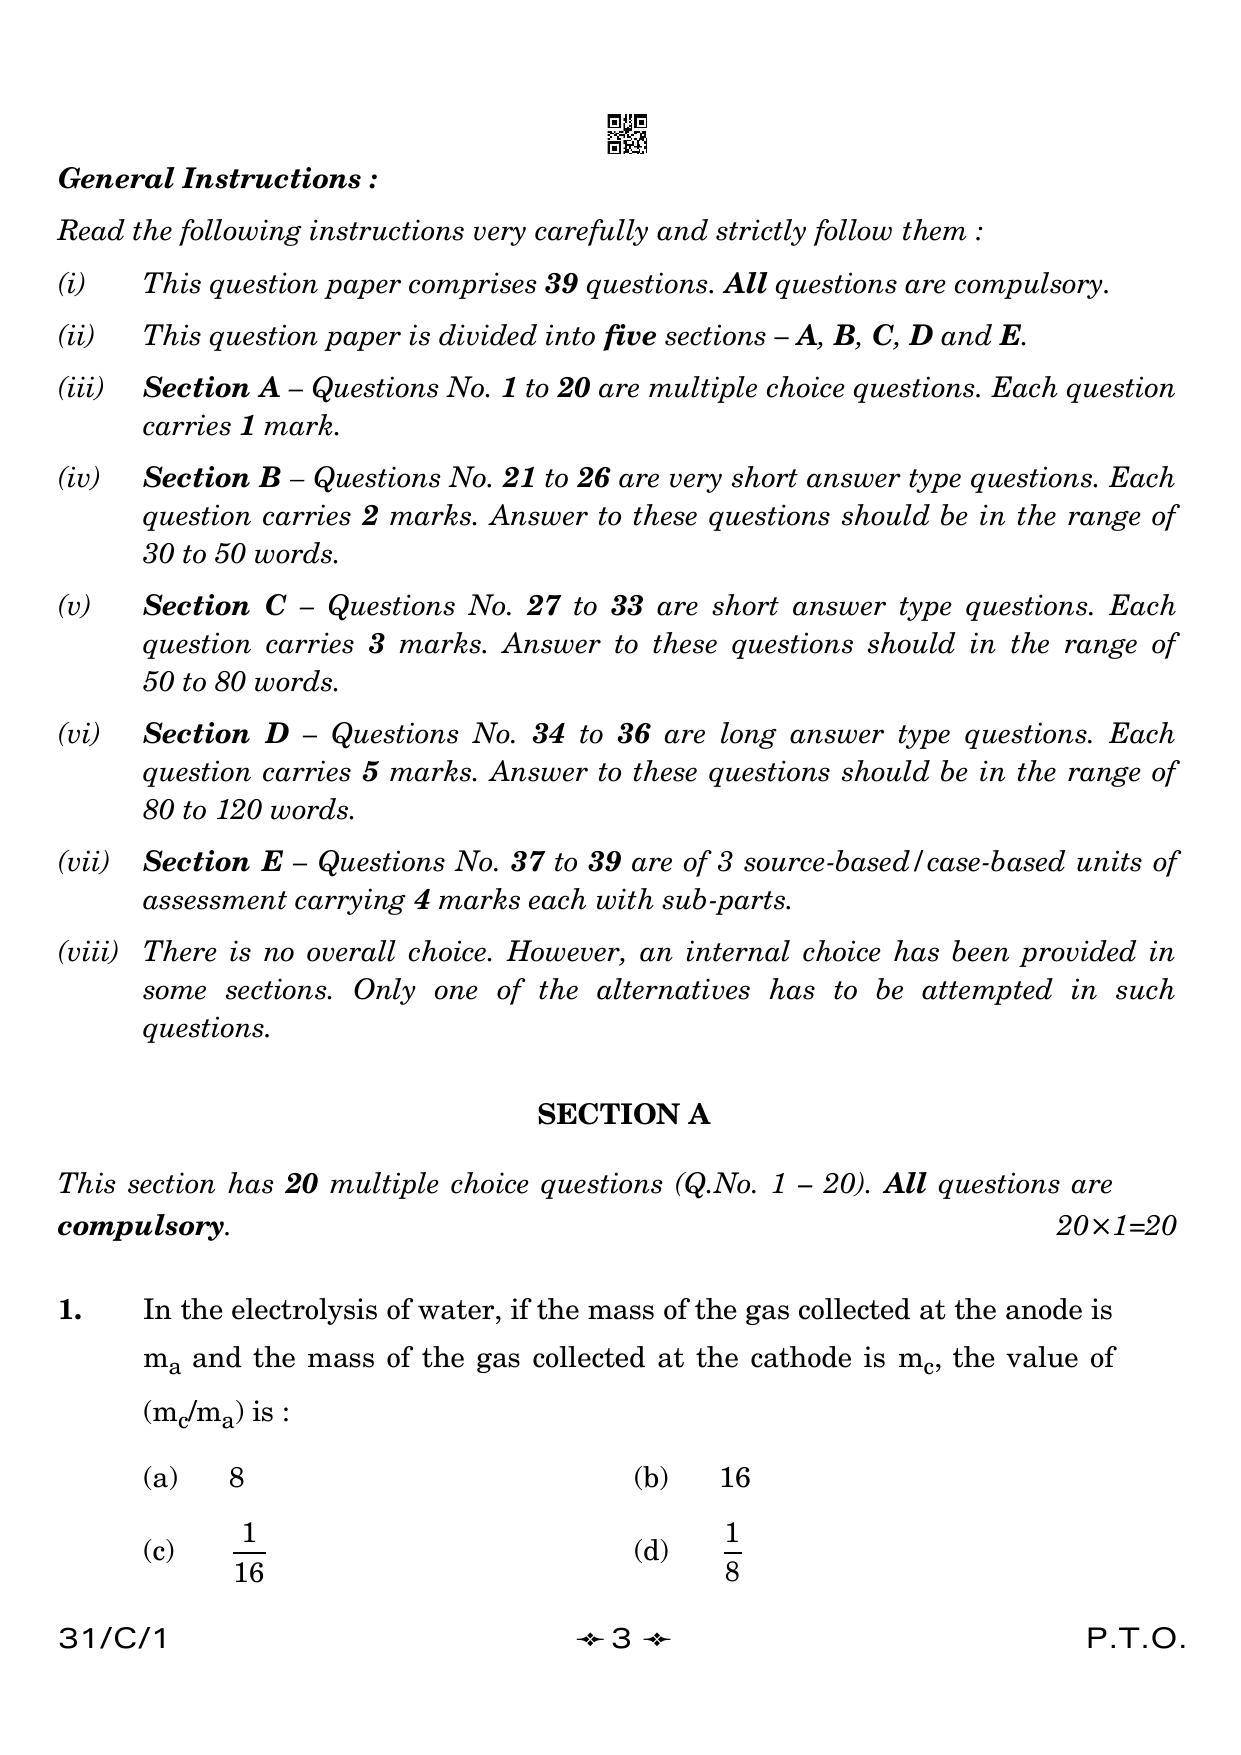 CBSE Class 10 31-1 Science 2023 (Compartment) Question Paper - Page 3